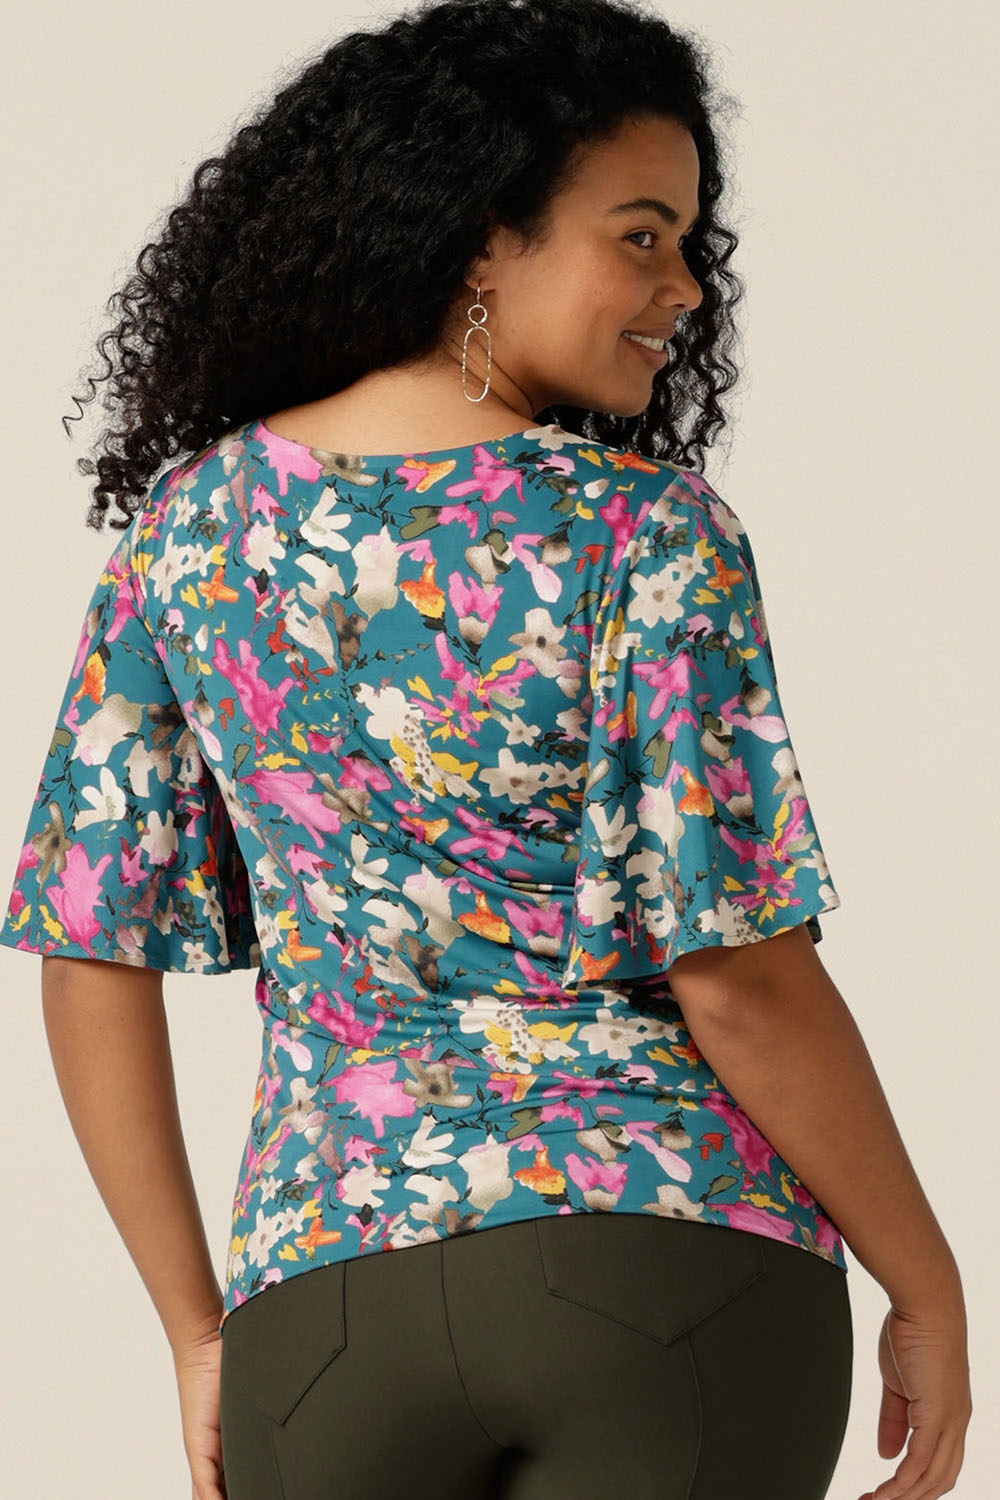 Size 12 woman wearing a floral print jersey top with flutter sleeves. The top is made in Australia by Leina and Fleur, who specialise in quality tops, dresses and pants for petite to plus size women for work, travel and casual wear.